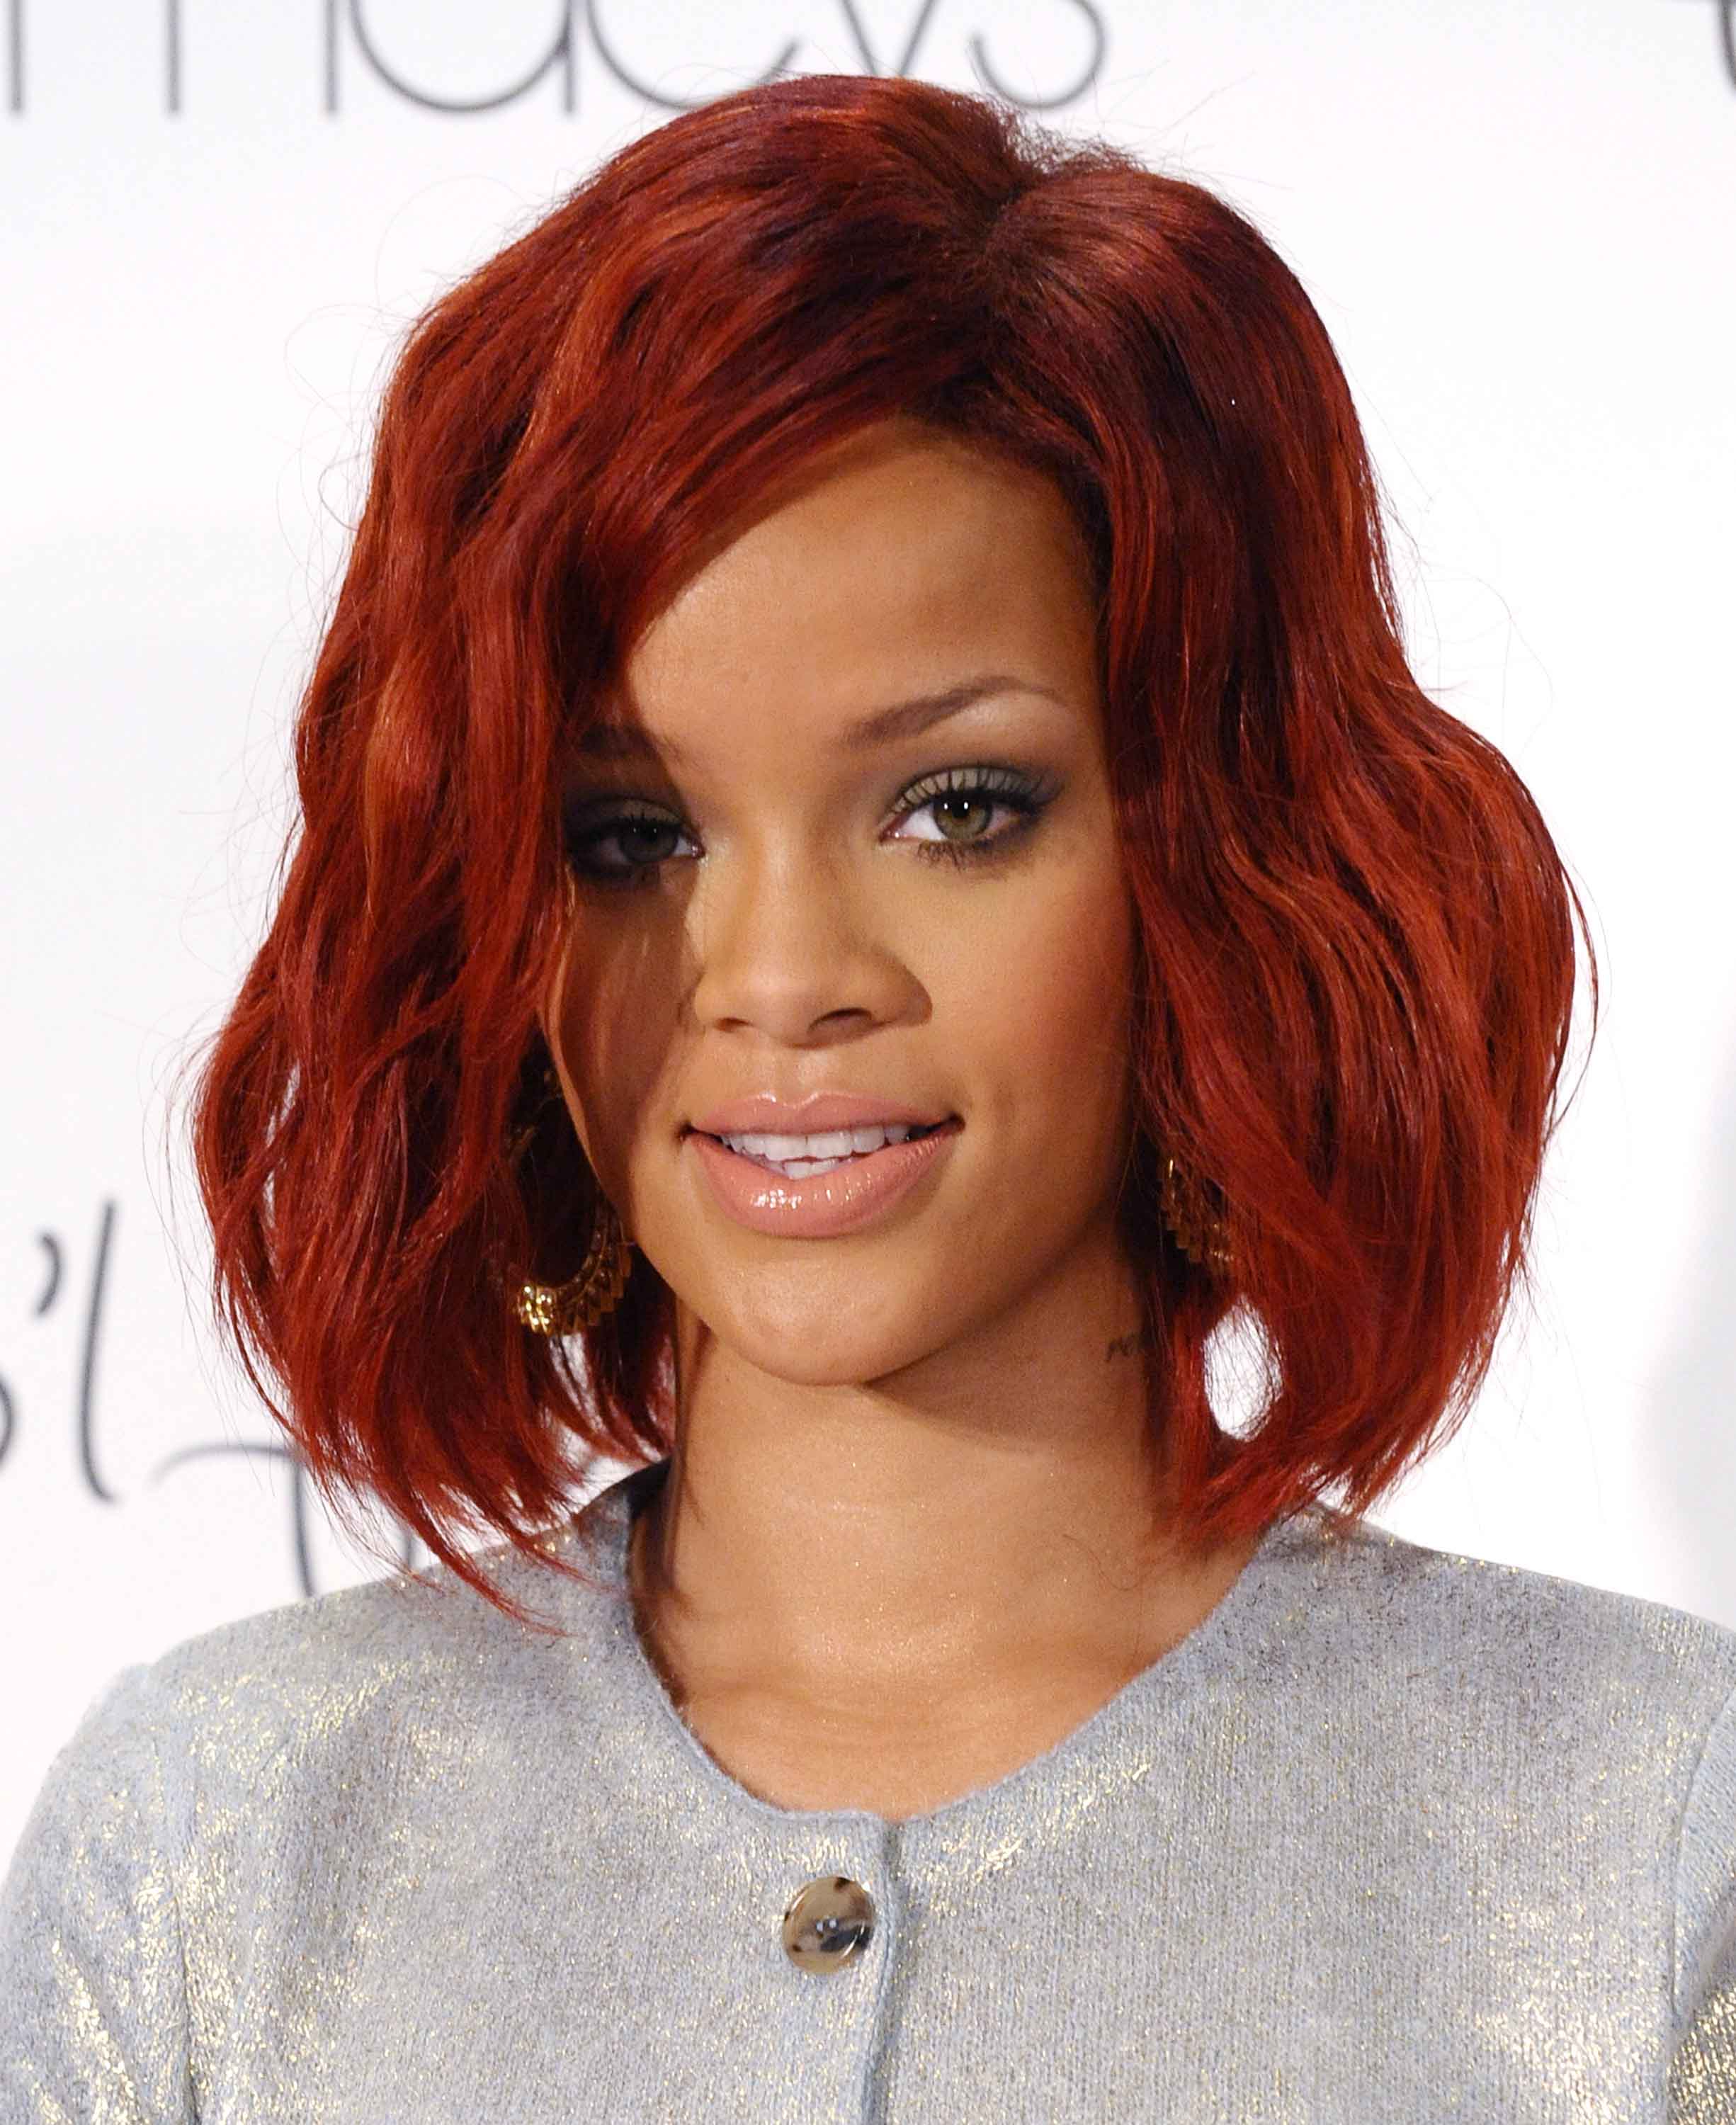 20 Amazing Celebrity Bobs and Lobs You Need To See For Hair Inspo